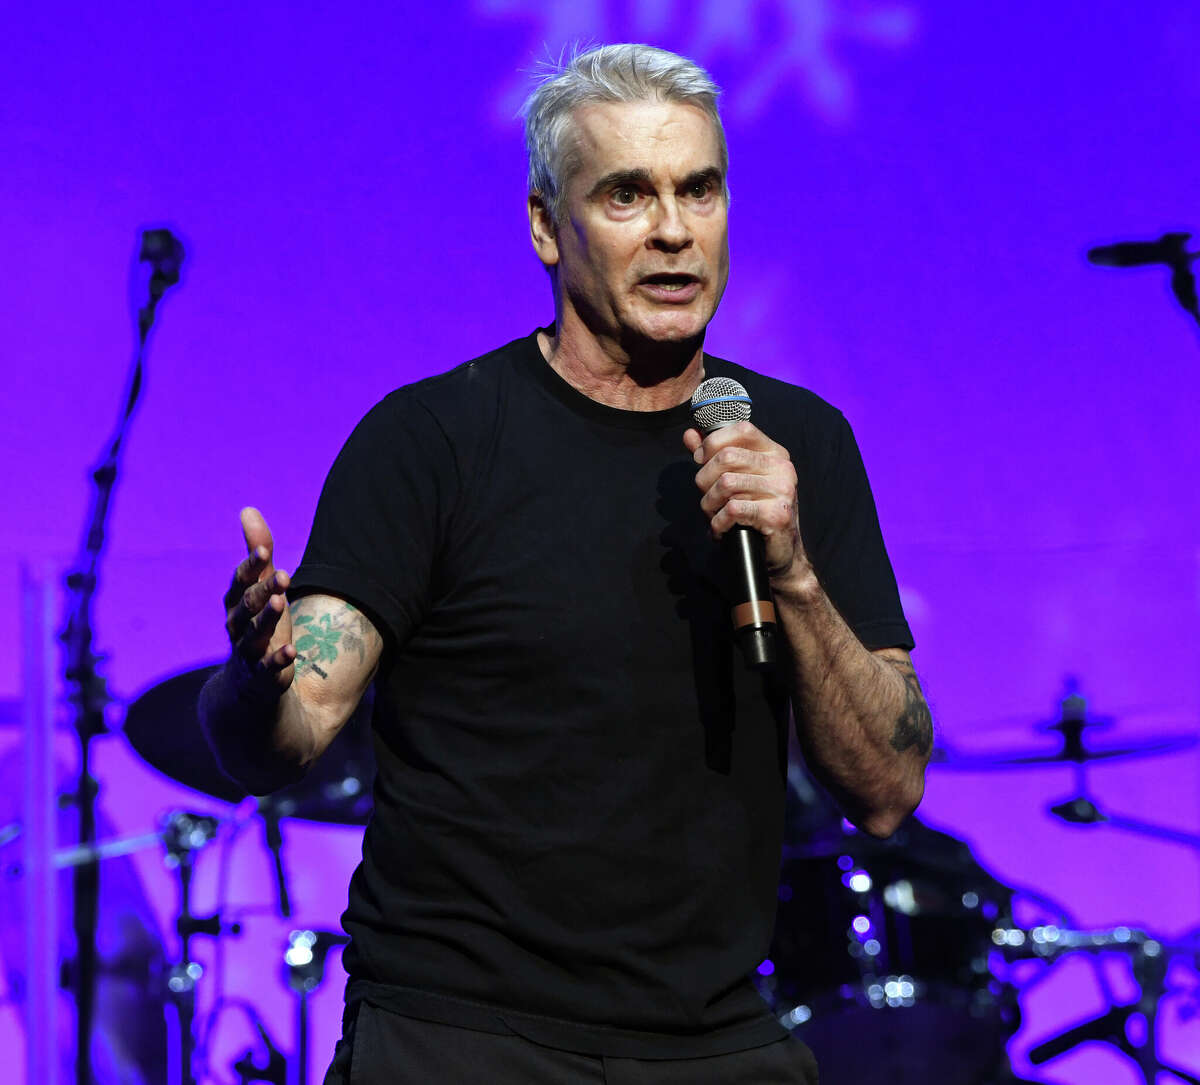 Henry Rollins performs onstage on December 10, 2019 in Los Angeles, California. (Photo by Kevin Winter/Getty Images)